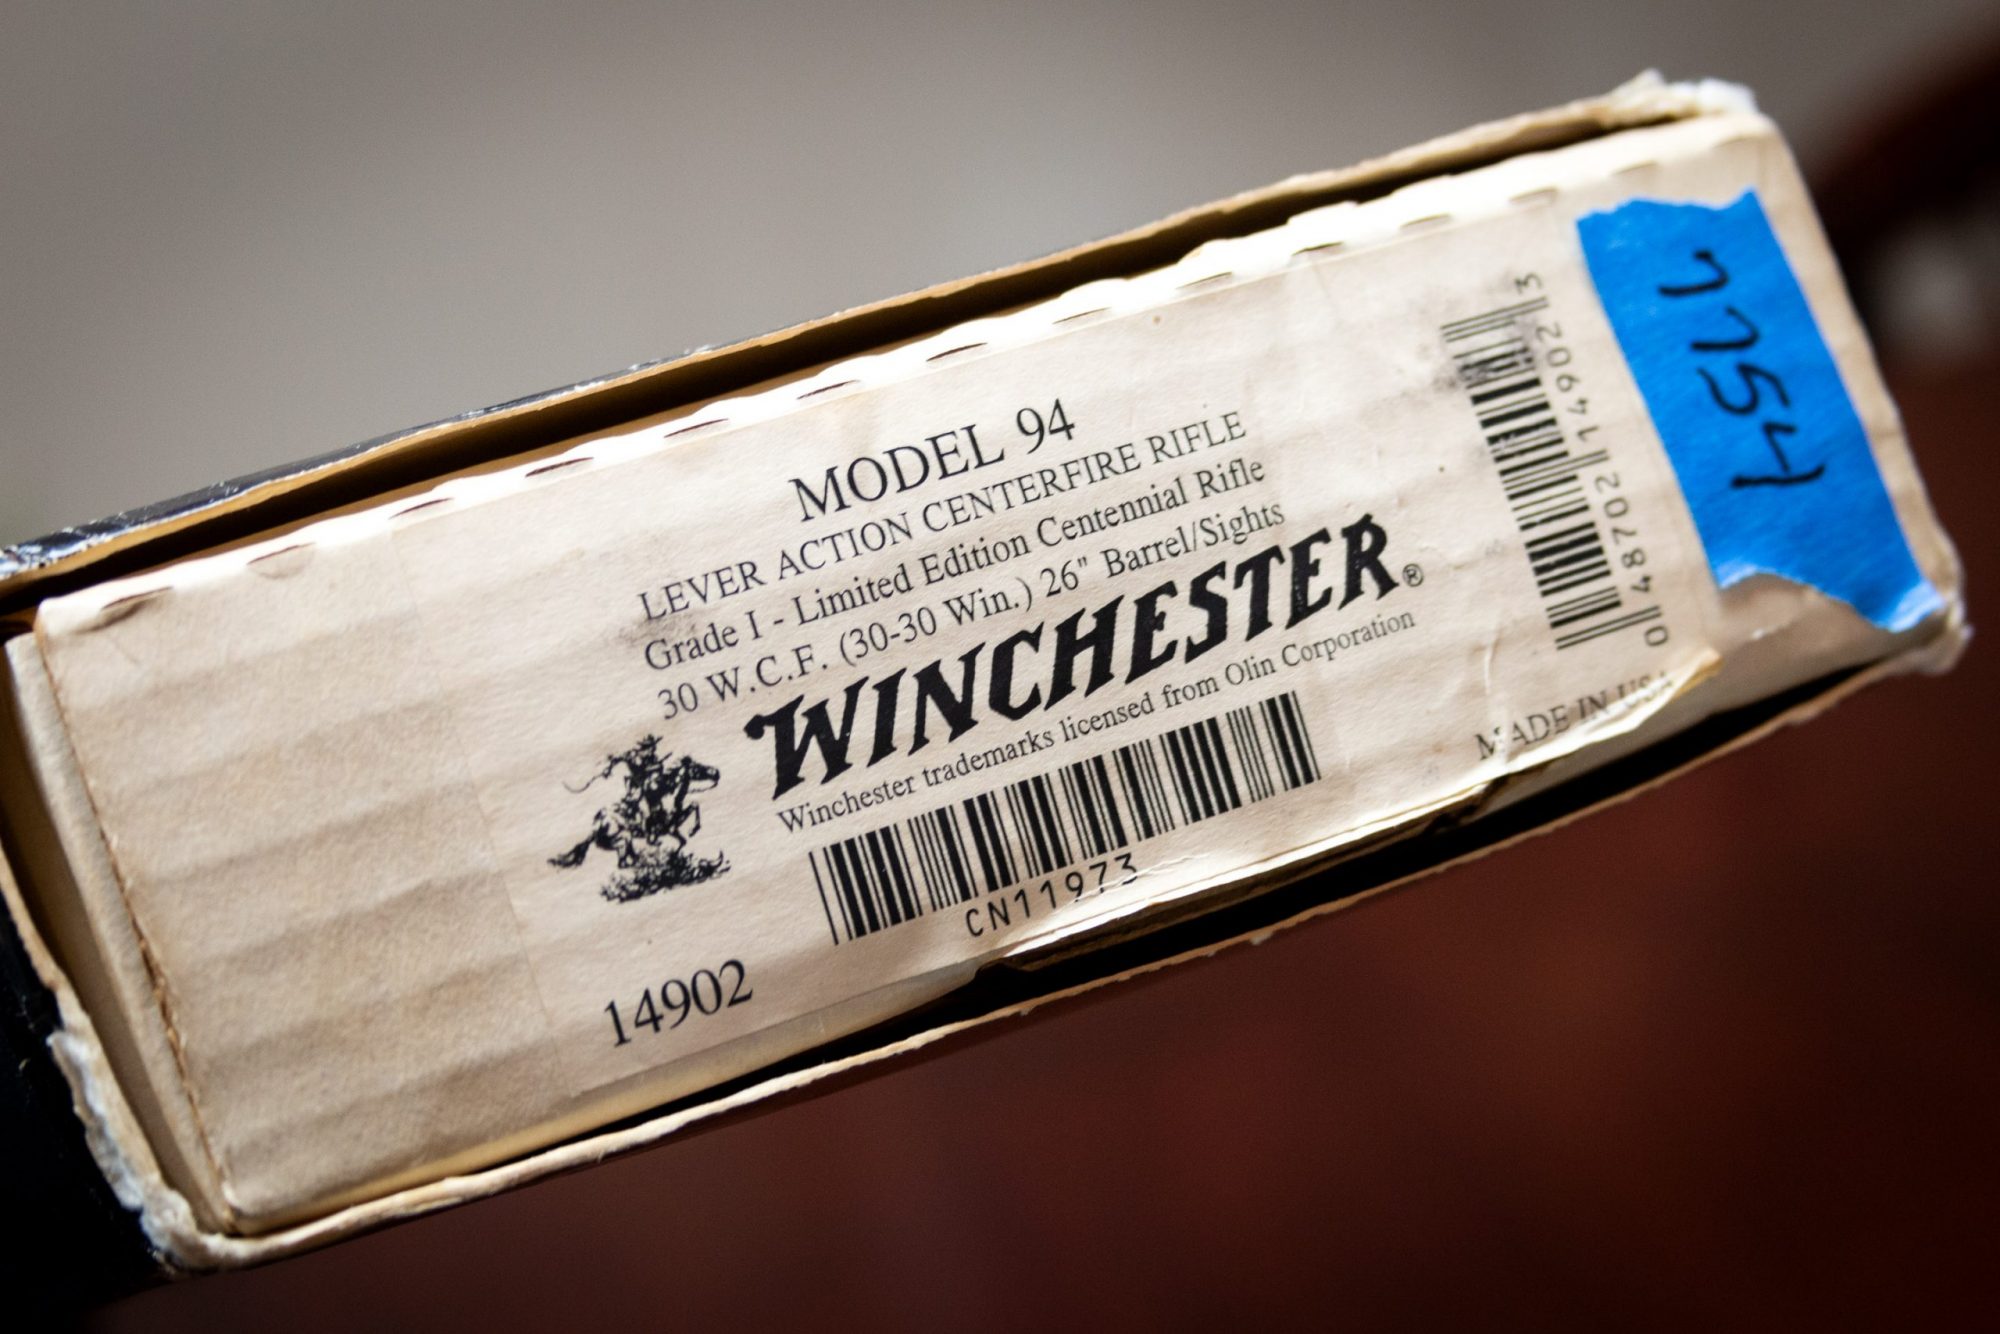 Photo of a pre-owned Winchester Model 94 Limited Edition Grade I Centennial Rifle, box